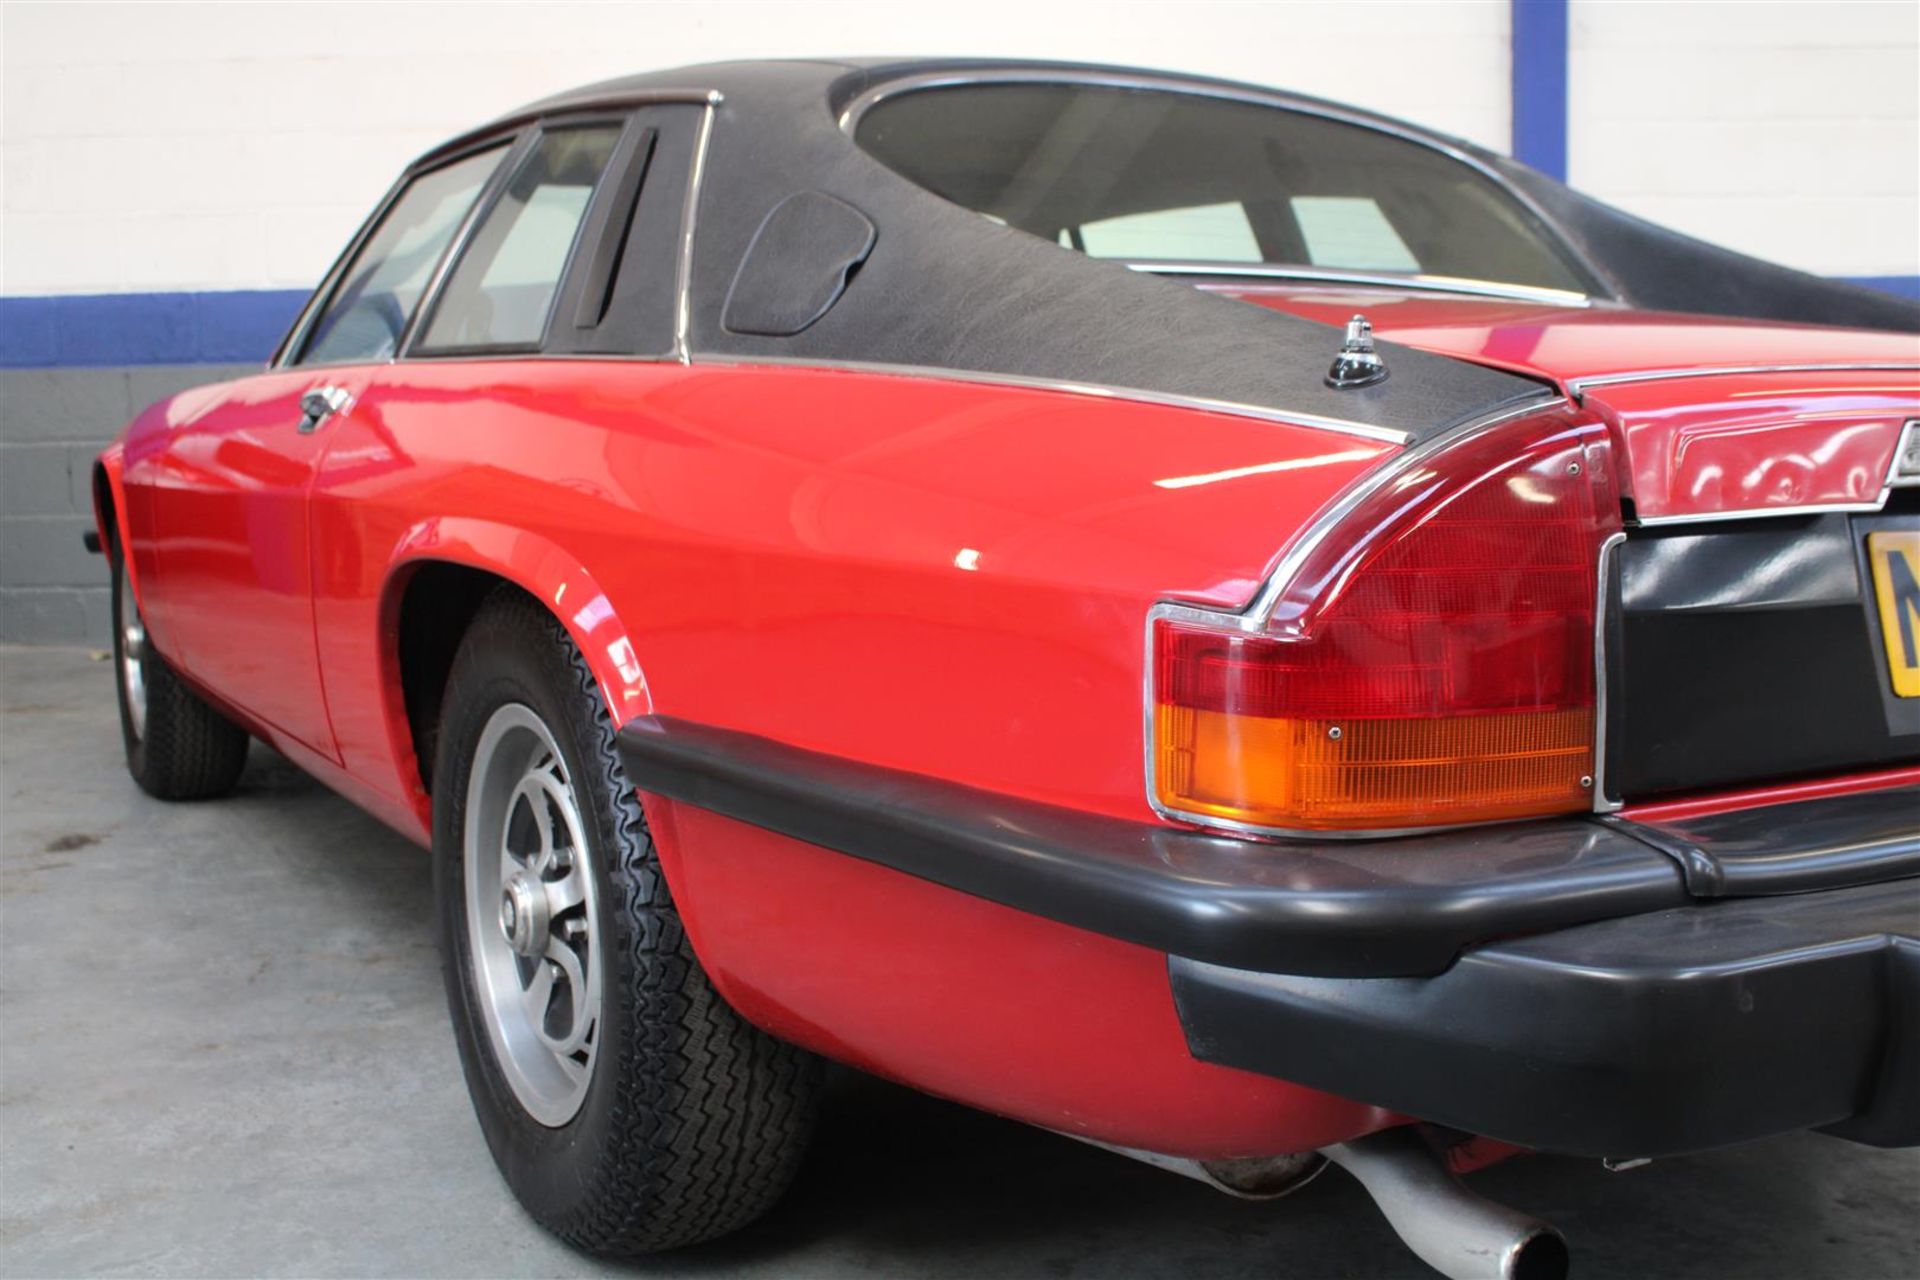 1976 Jaguar XJ-S 5.3 V12 Coupe Auto 29,030 miles from new - Image 21 of 23